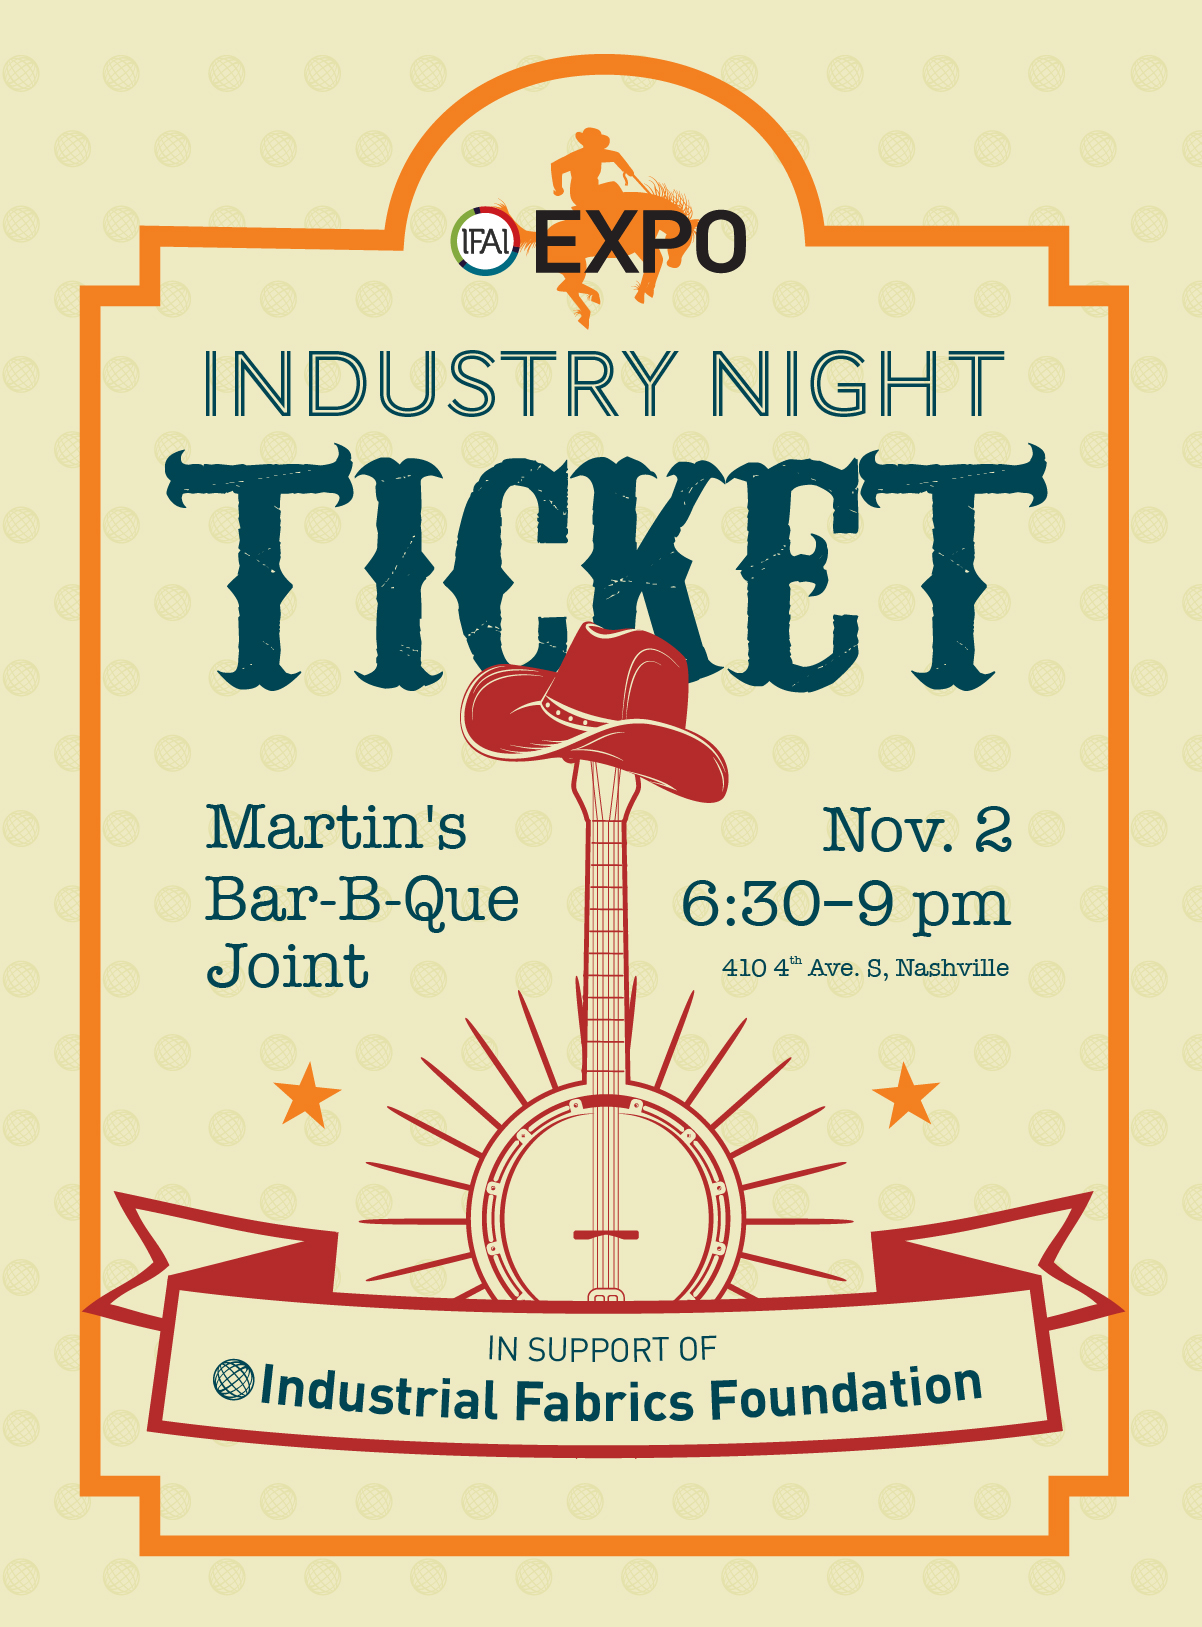 IFF's Industry Night at IFAI Expo 2021 -  Additional Tickets 